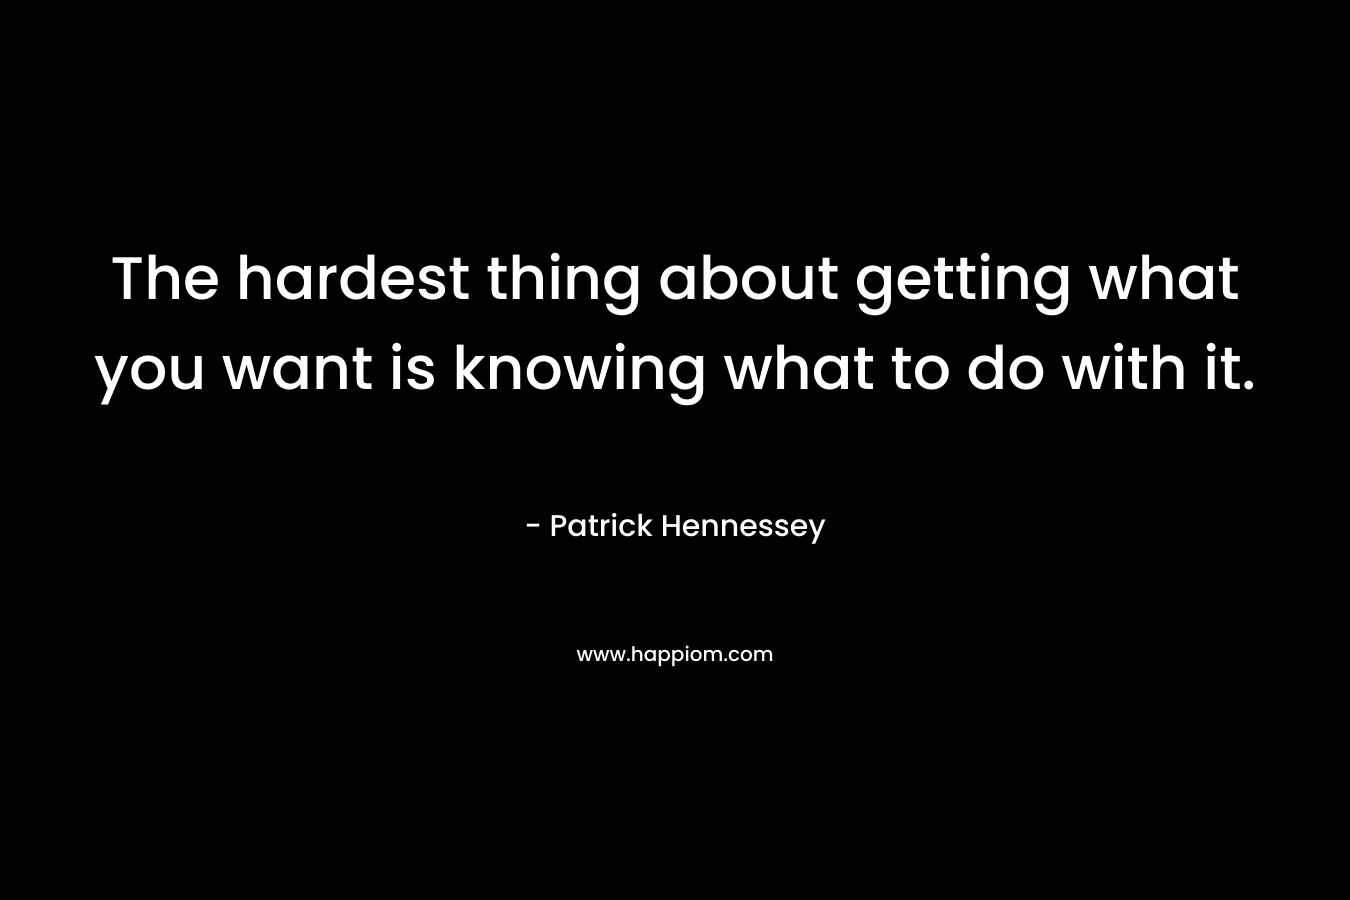 The hardest thing about getting what you want is knowing what to do with it.